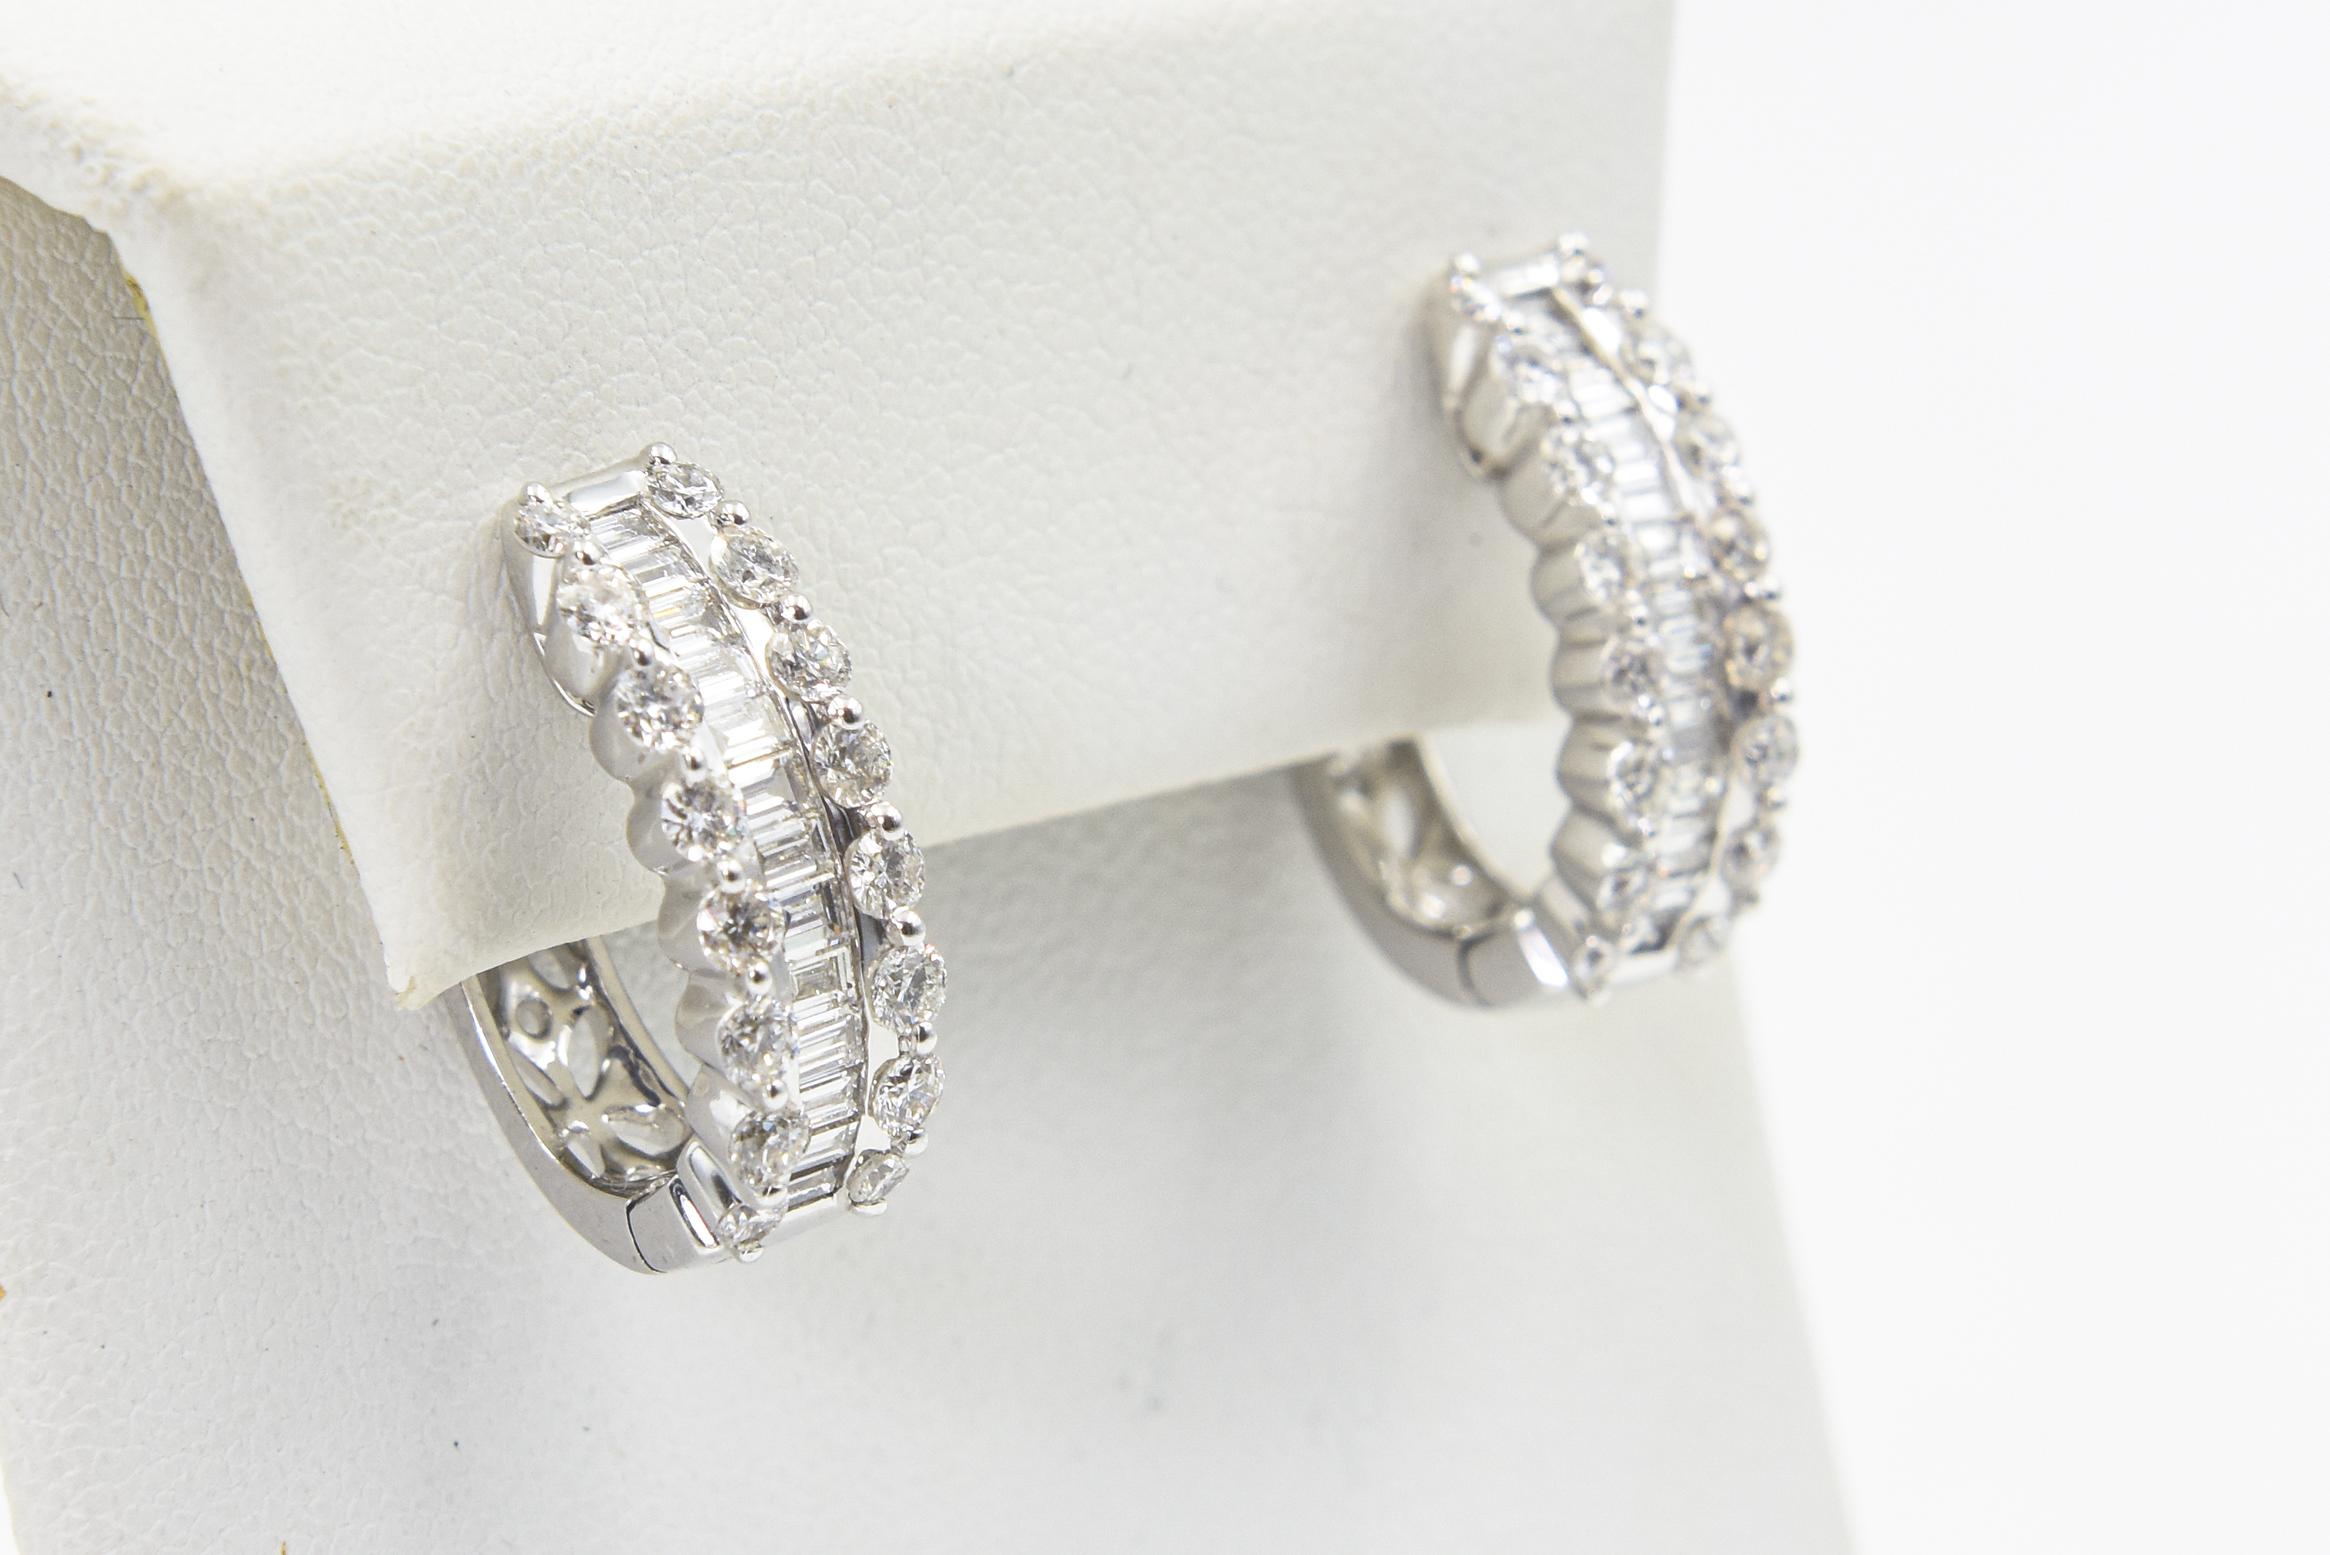 Beautifully made with white clean stones.  There 18k white good hoops contain 2.36 carats of diamonds. The back of the earrings has a elegant open work design so that you can wear them either way.

They have a lever back for pierced ears.

Marked